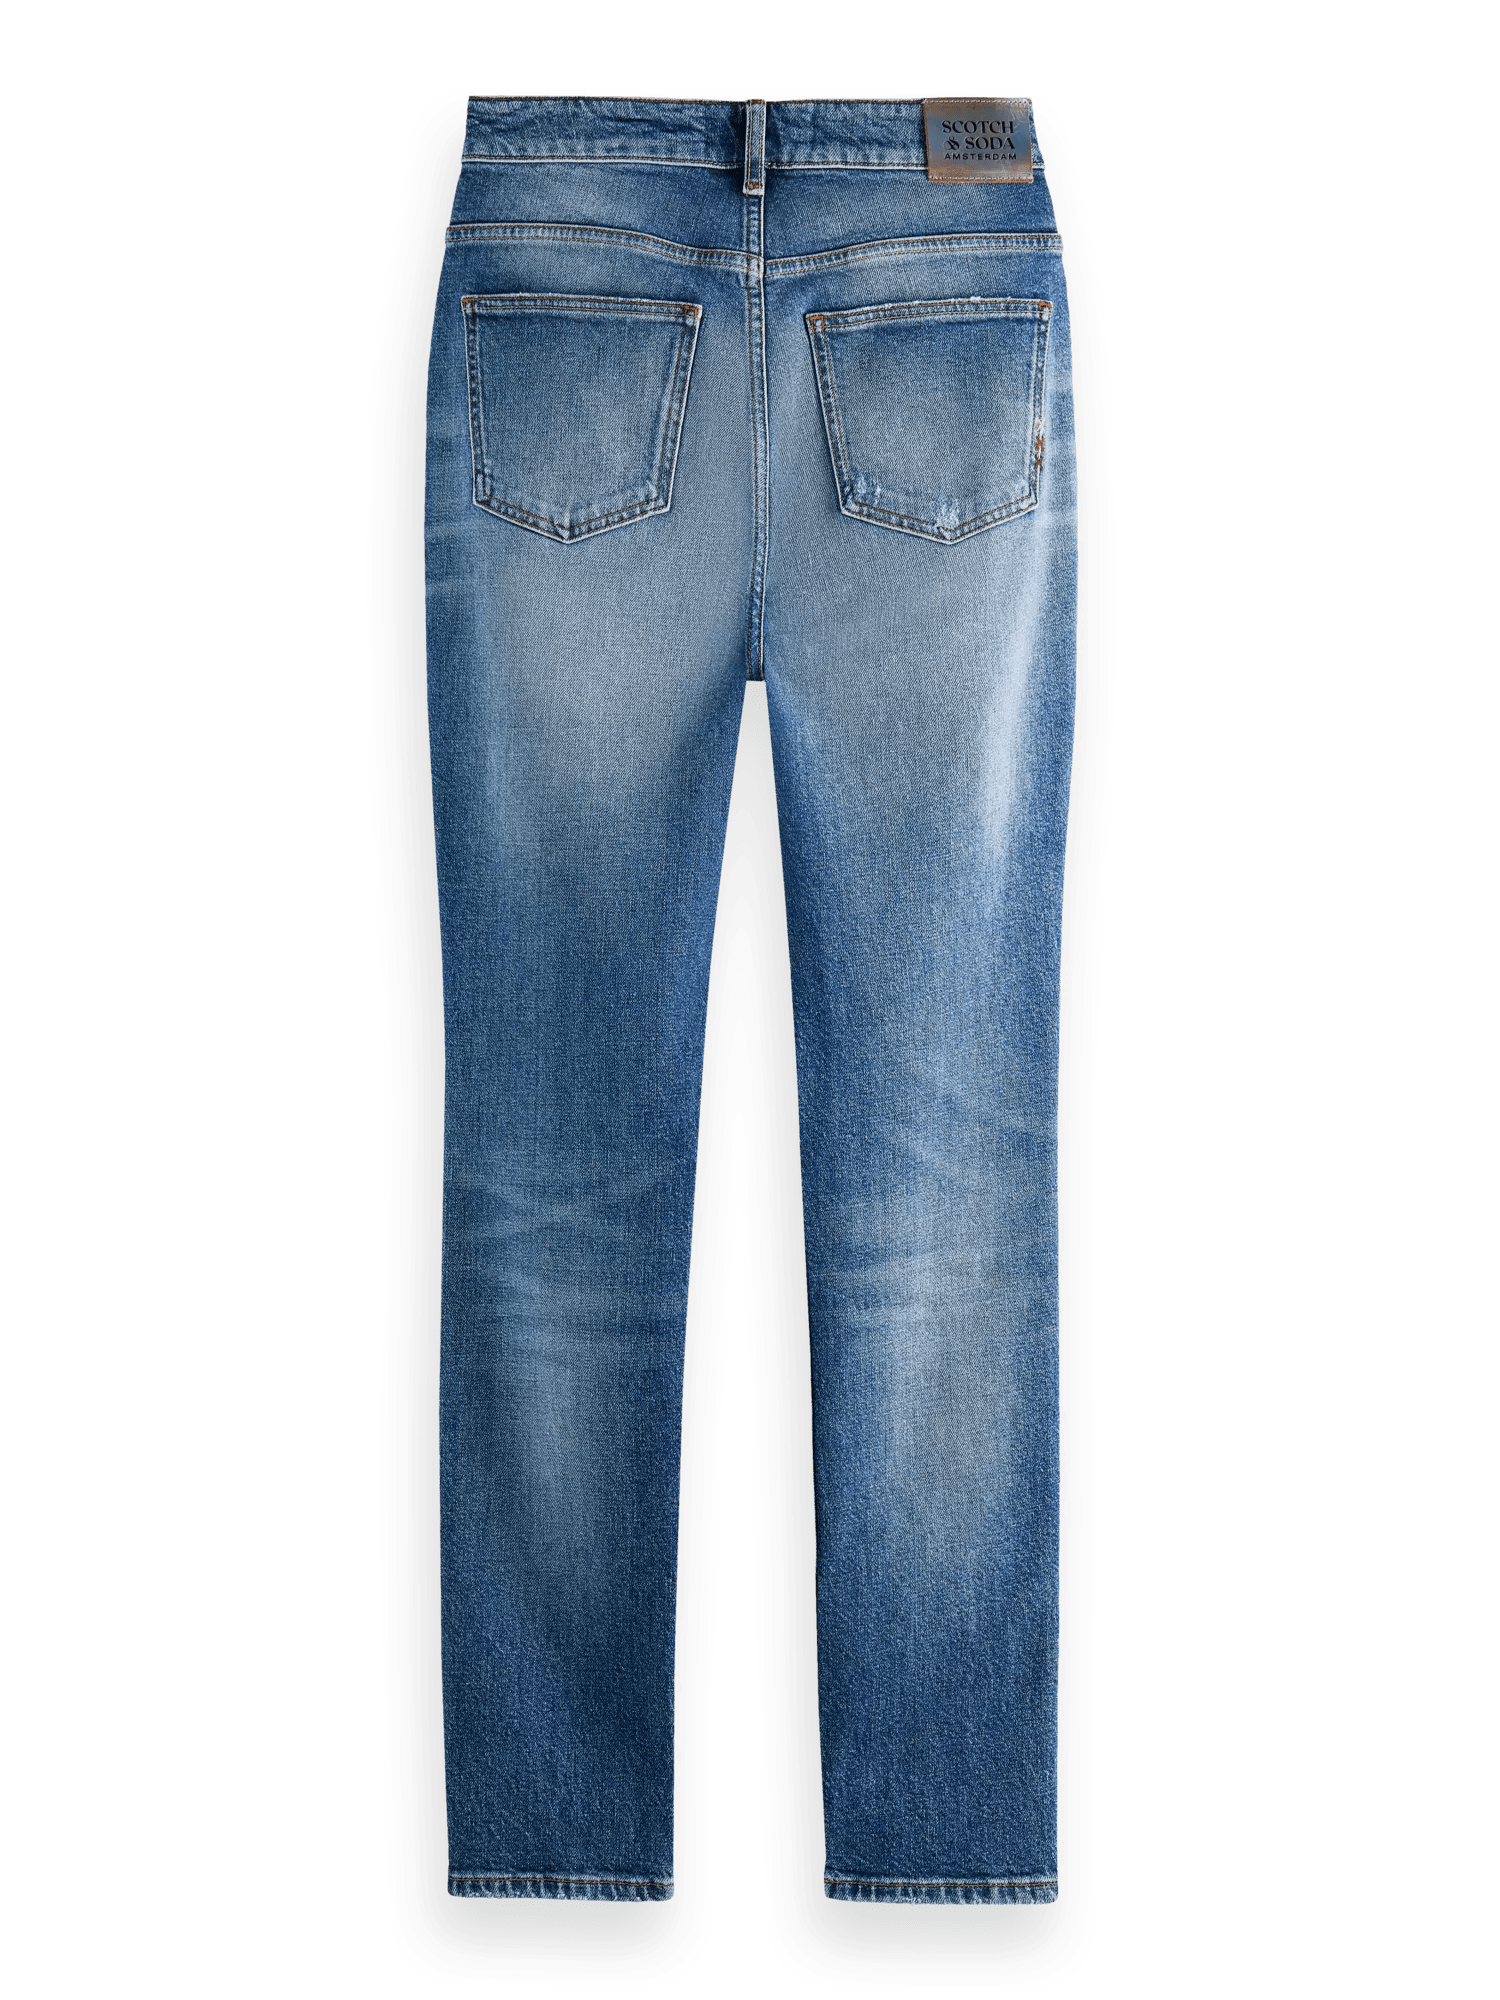 Scotch & Soda The Line high-rise skinny fit organic cotton jeans BCK